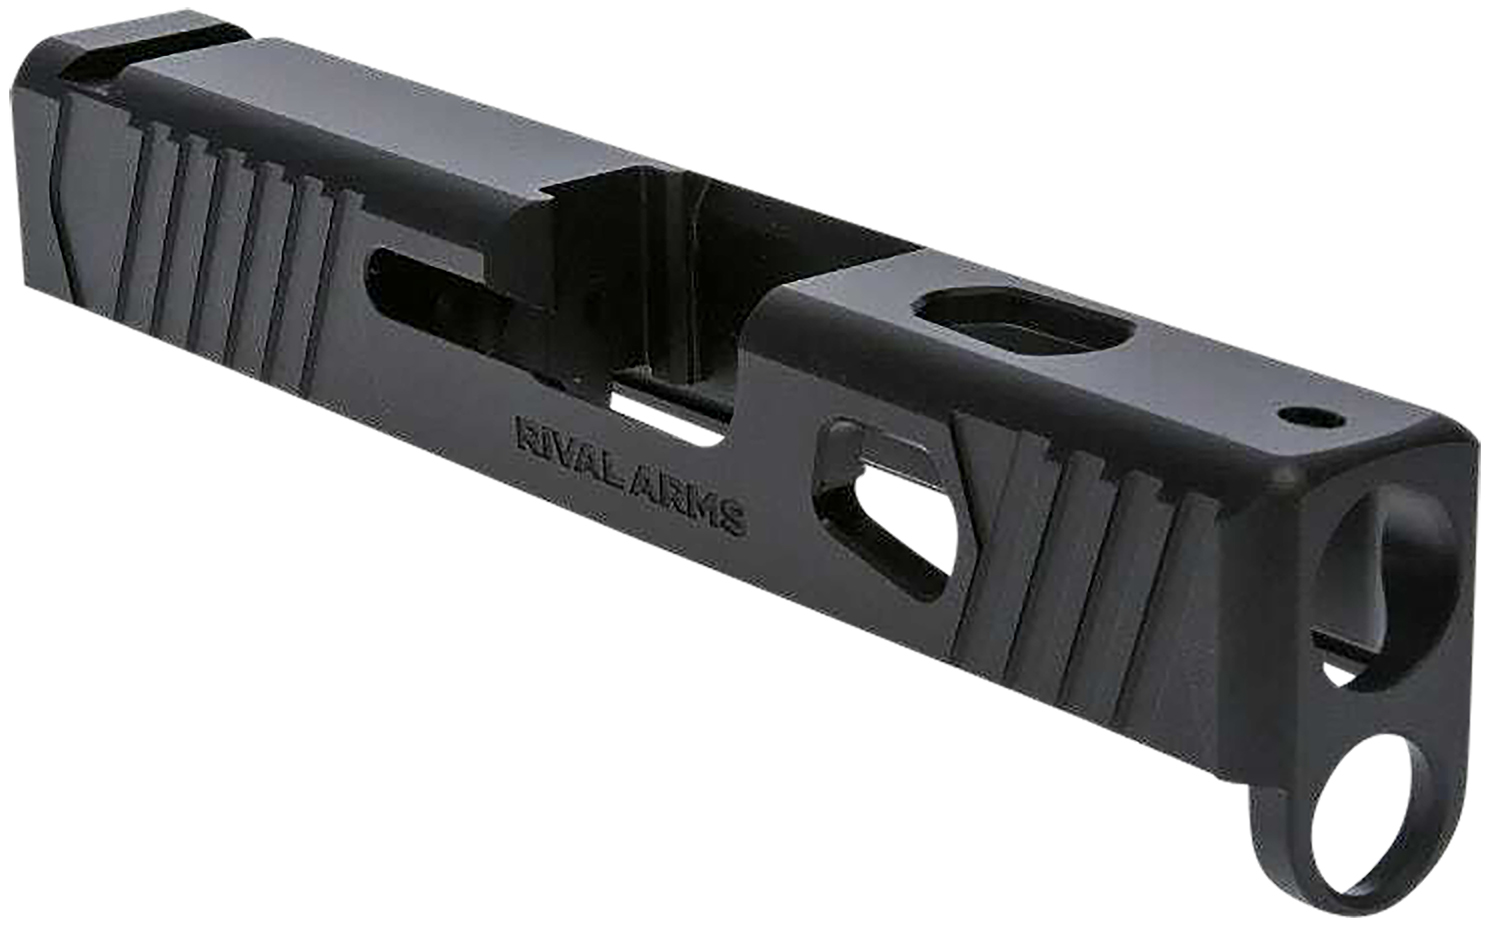 Rival Arms RA10G305A Precision Slide A1 Compatible w/Glock 43 Gen3, 9mm Luger Black QPQ Stainless Steel, RMR Cut Sights